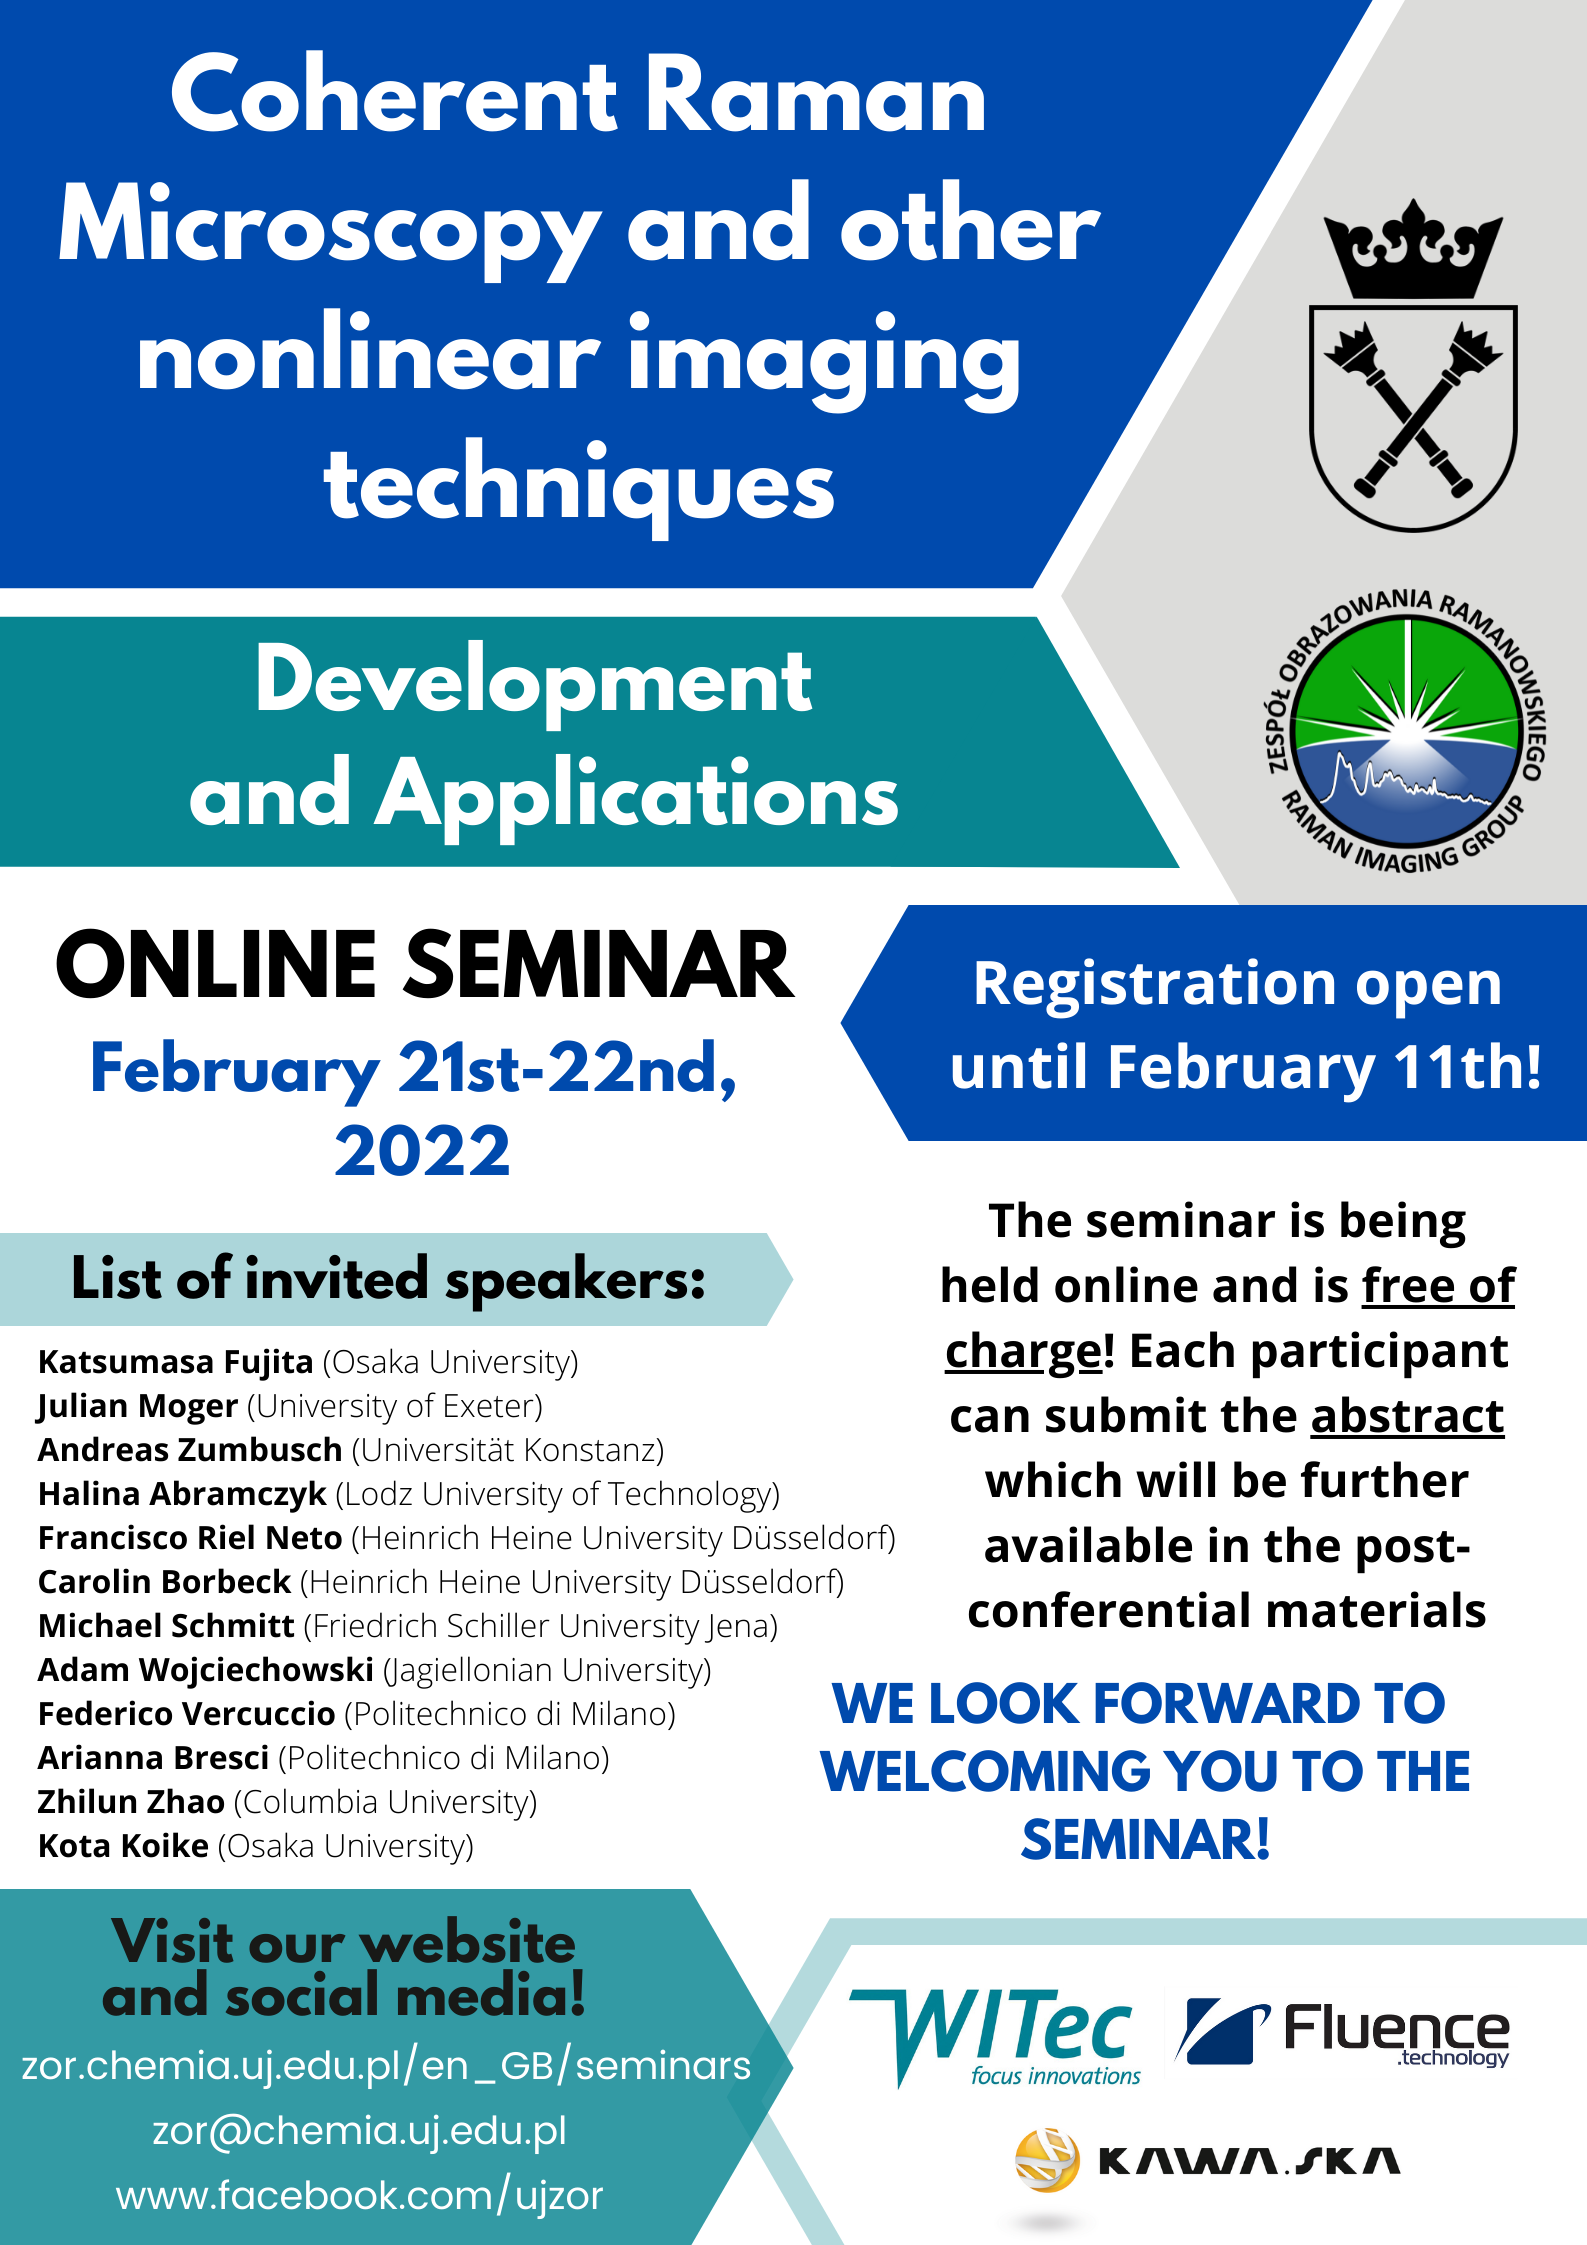 Seminar - Coherent Raman Microscopy and other nonlinear imaging techniques - development and applications